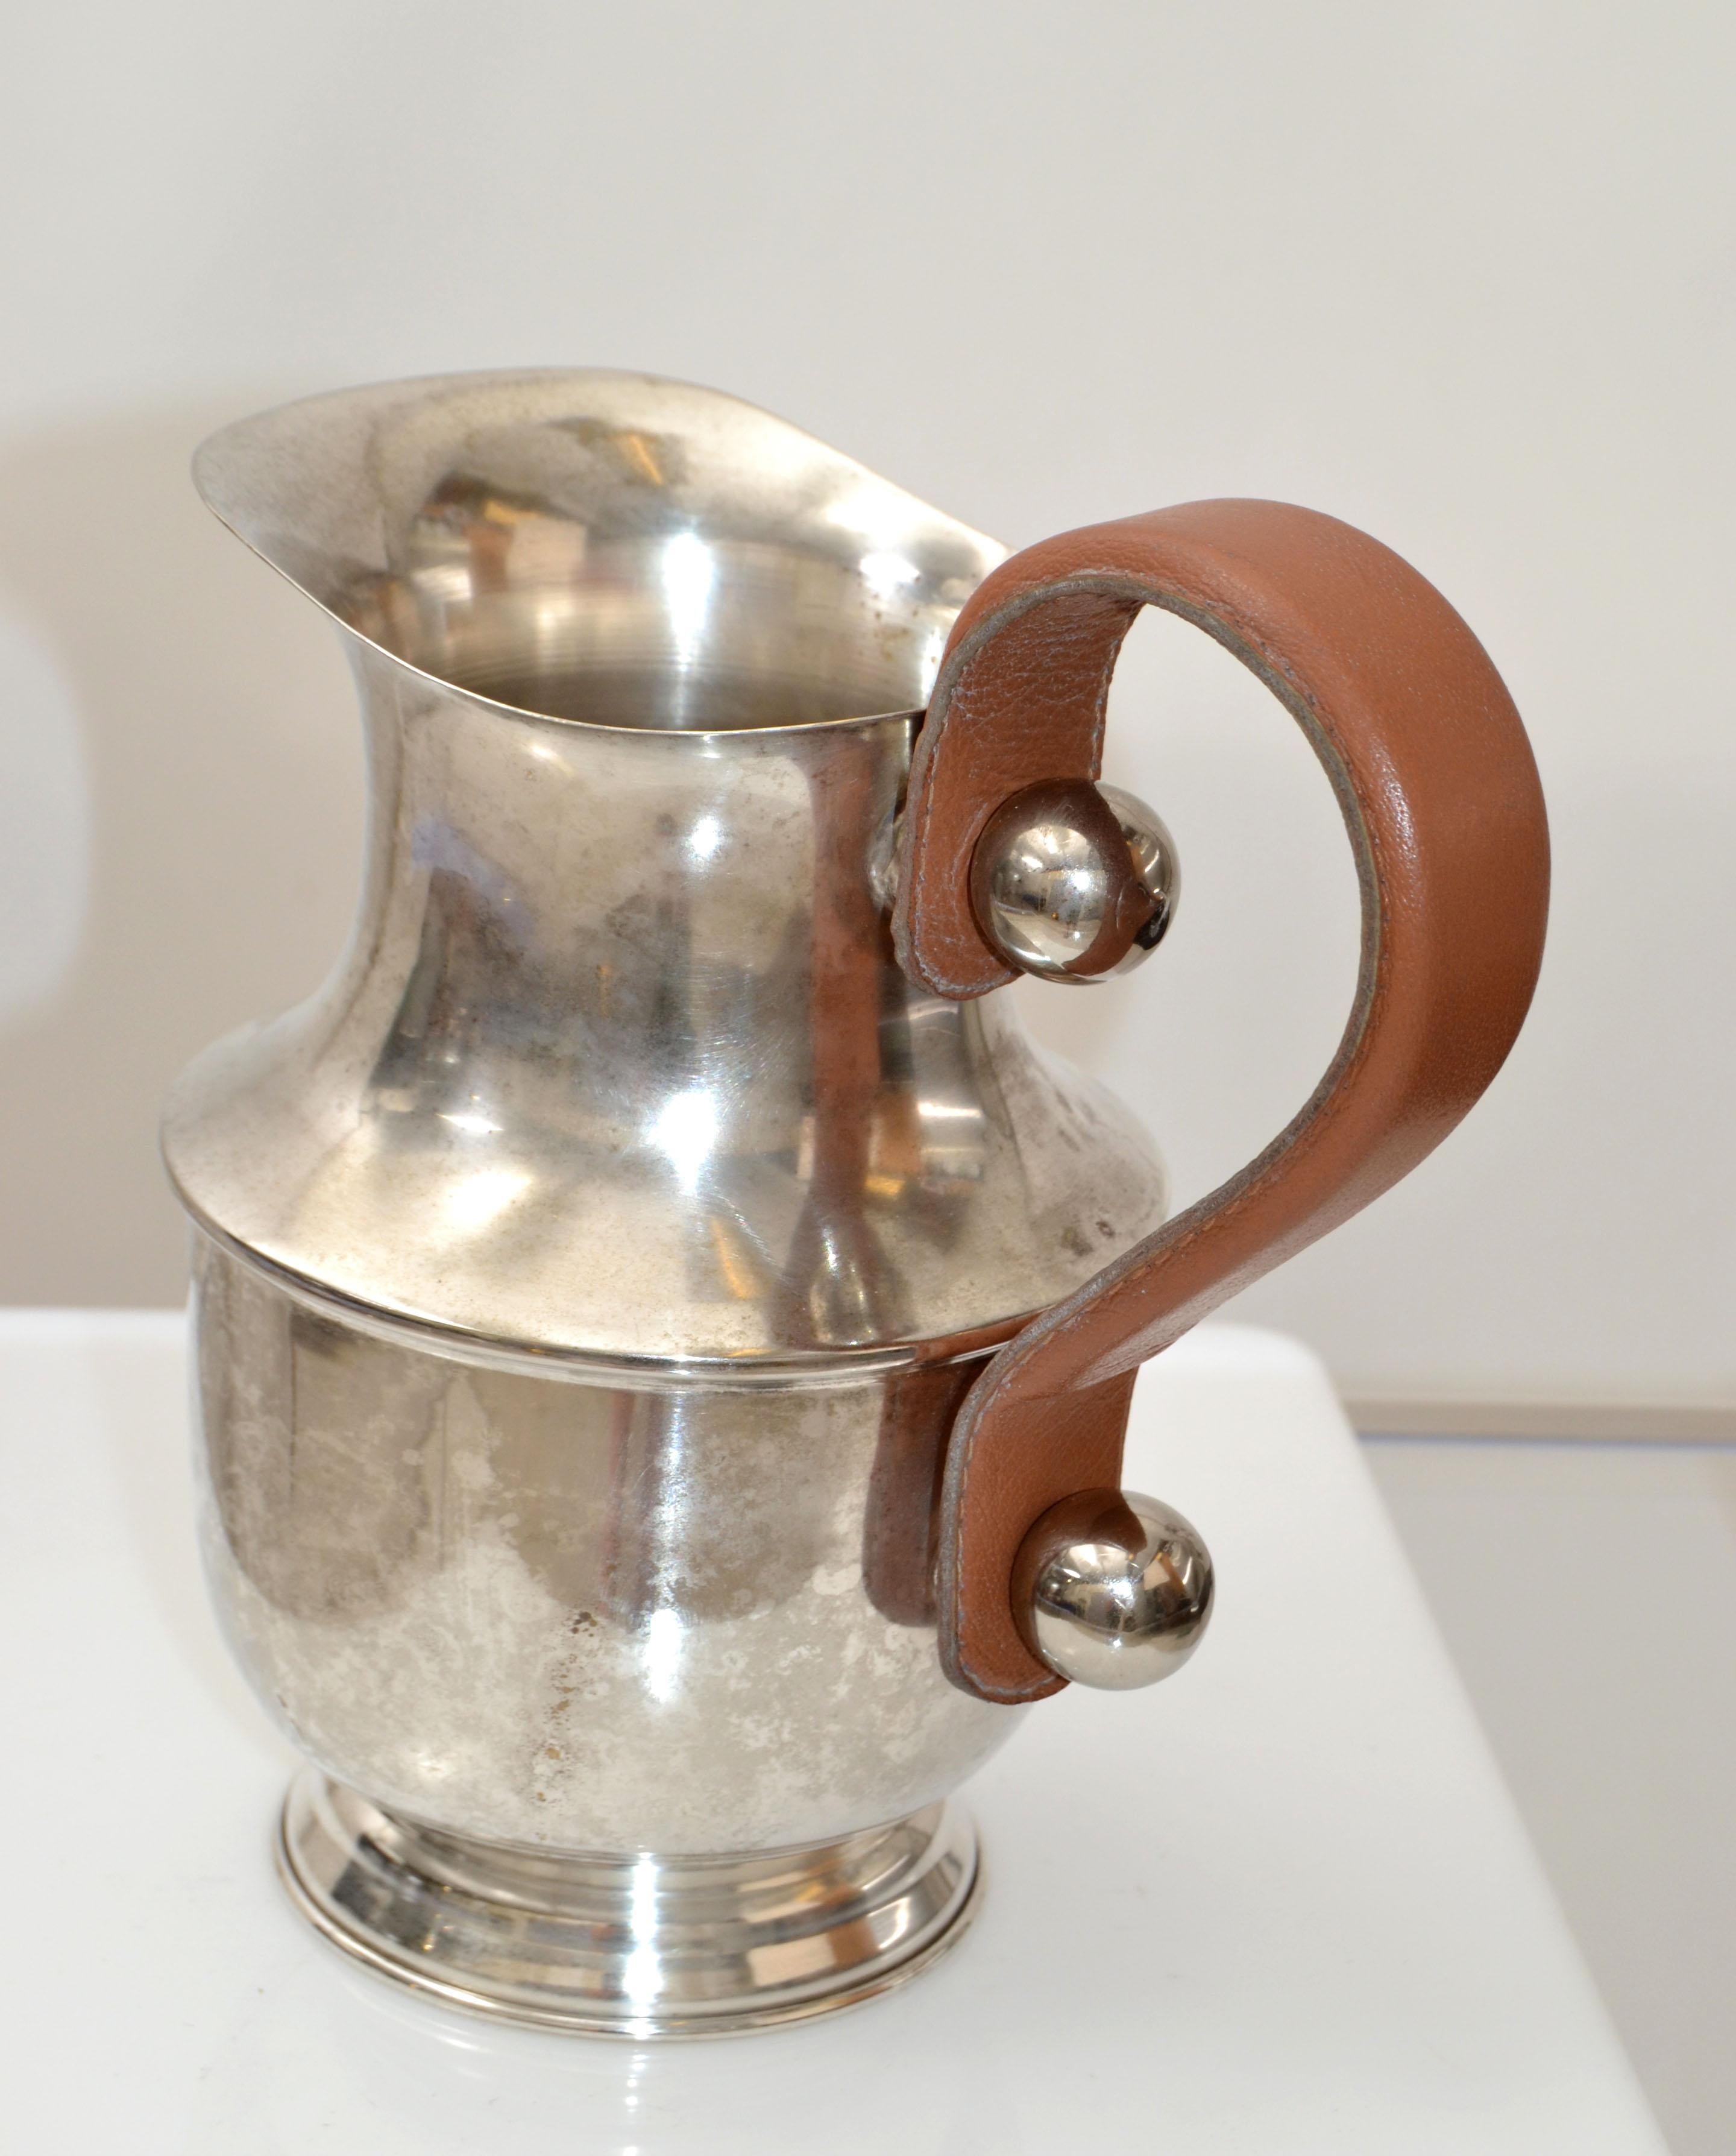 Leather Hermès Style Mid-Century Modern Silver Plate over Nickel Decanter, Vessel Carafe